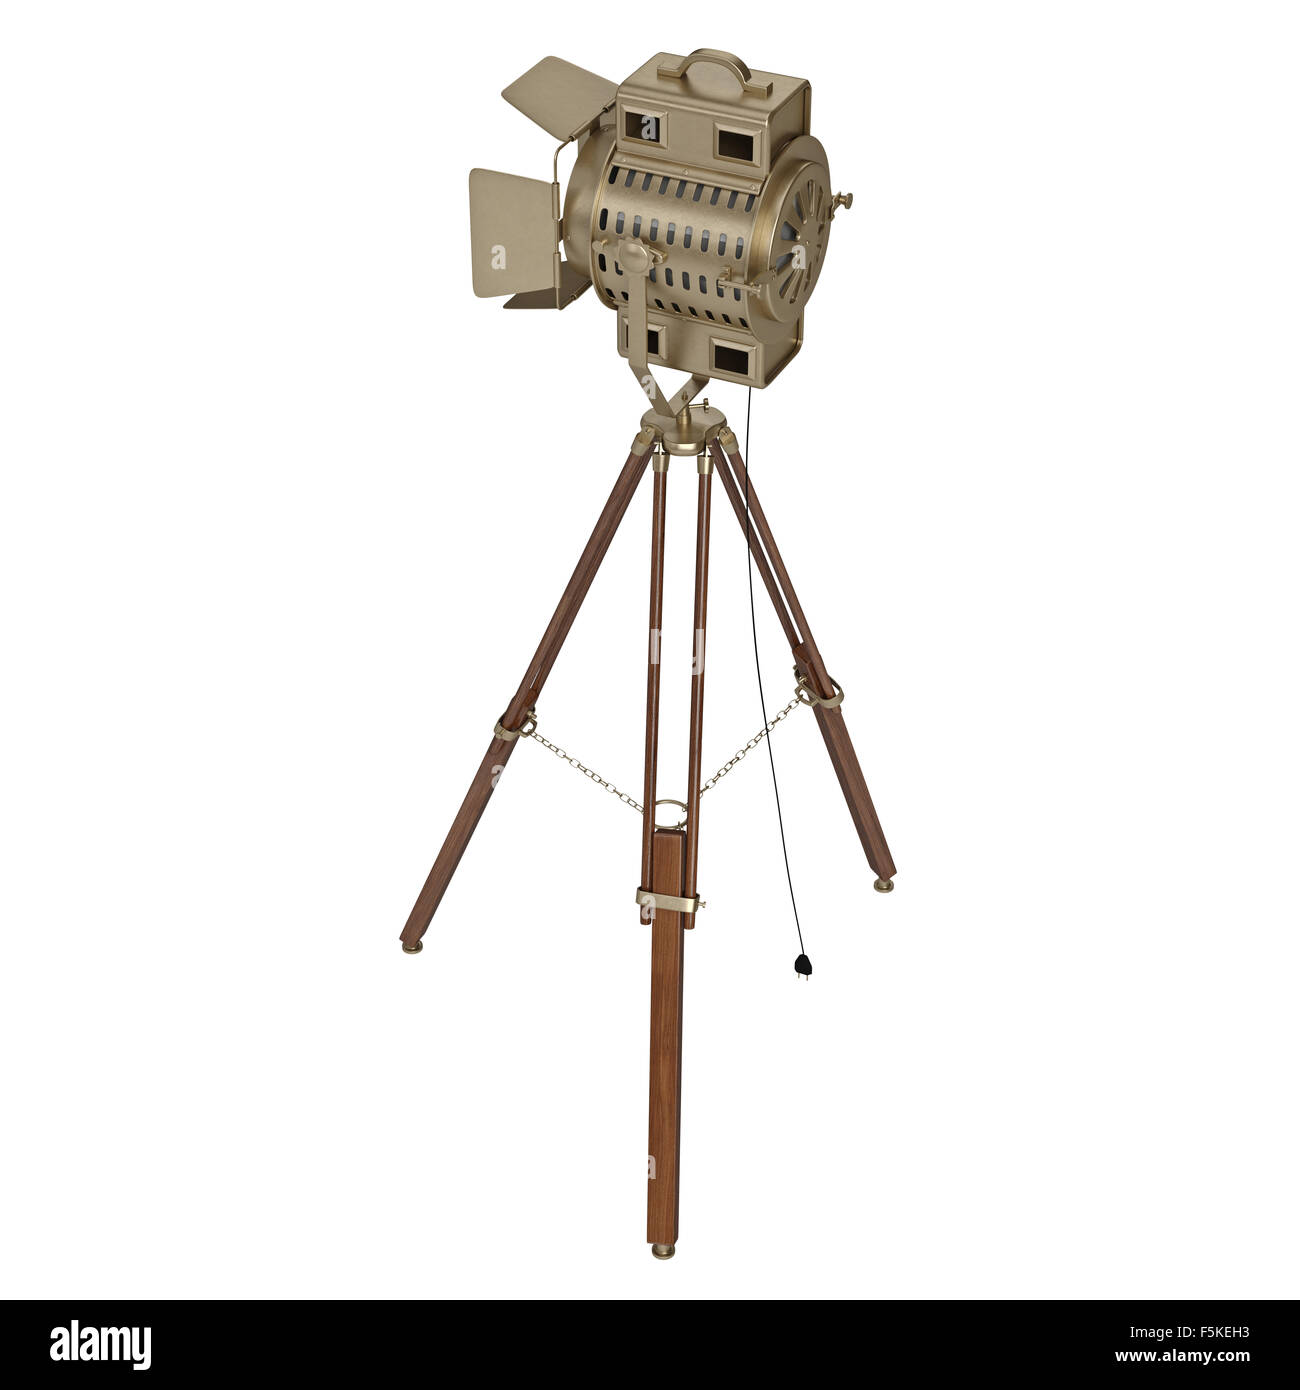 Stage lamp with wooden tripod Stock Photo